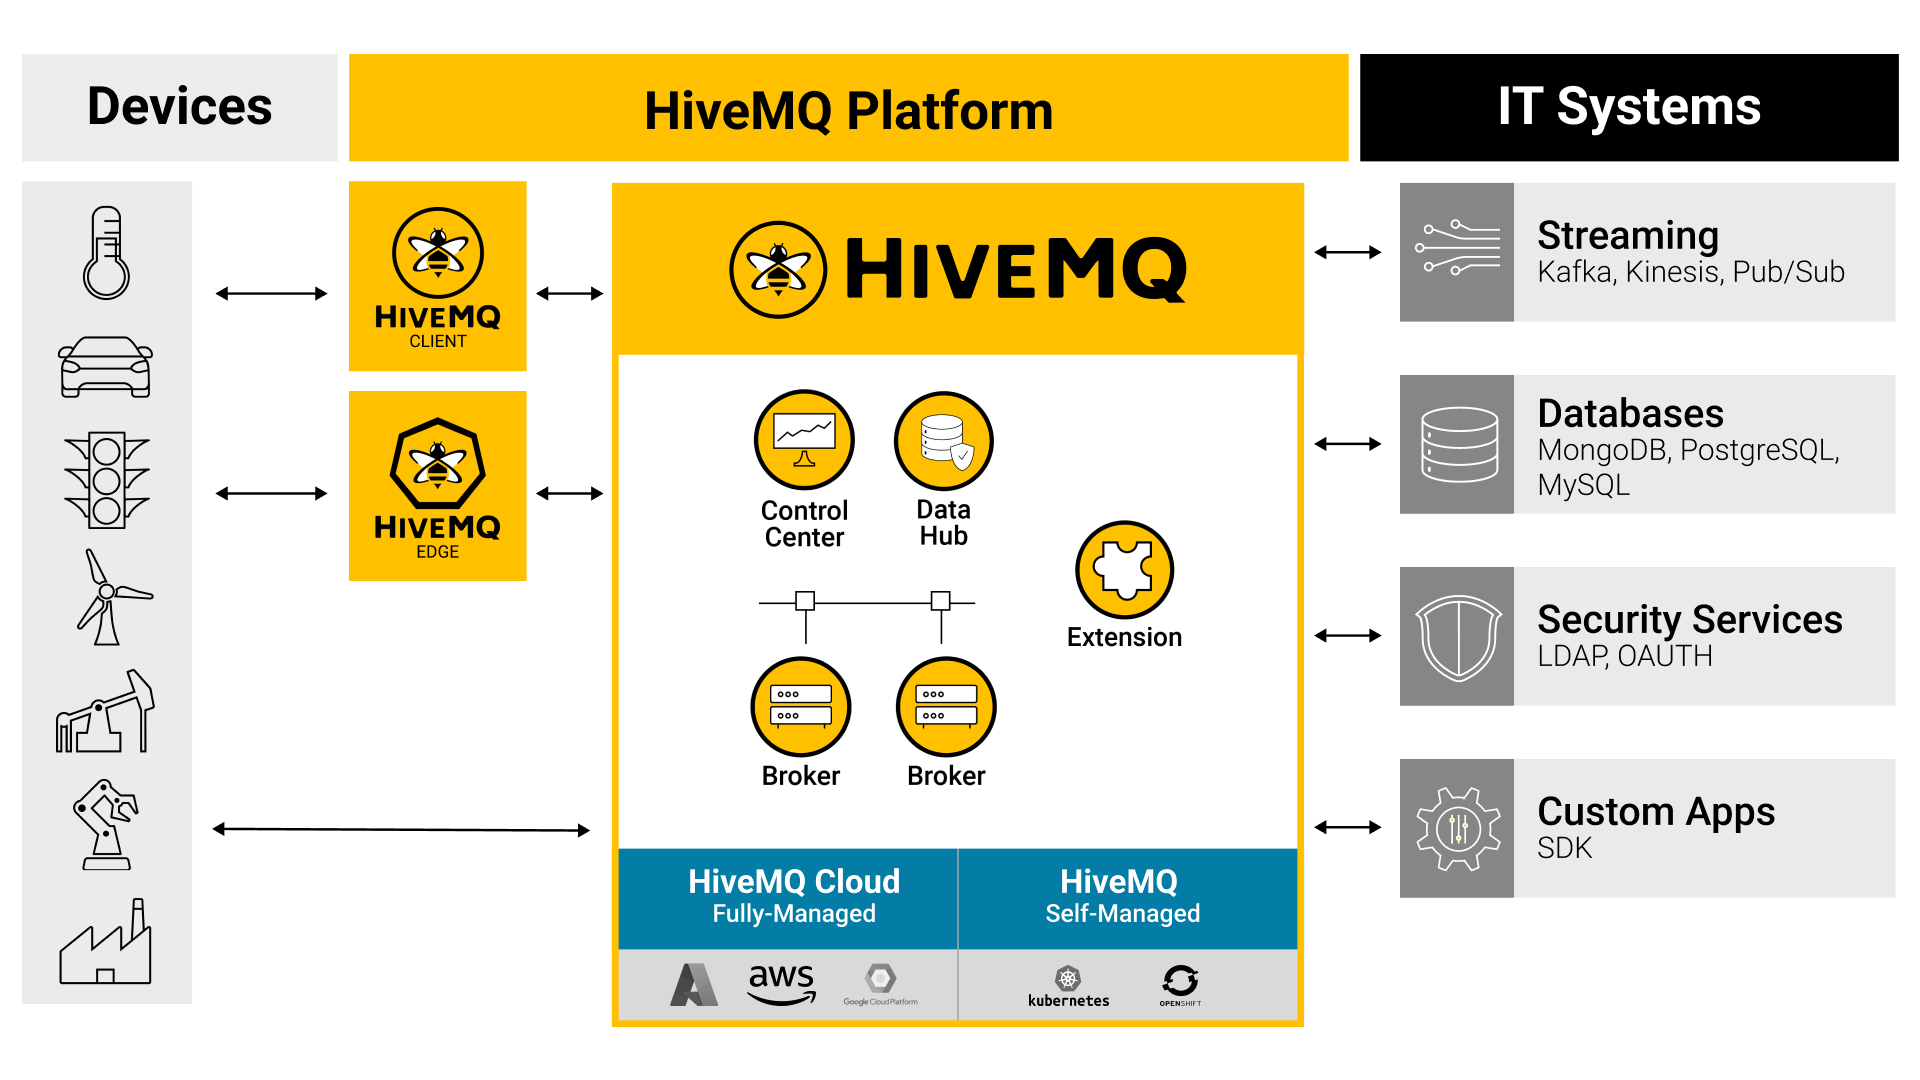 HiveMQ runs in many different environments and infrastructures, including Kubernetes